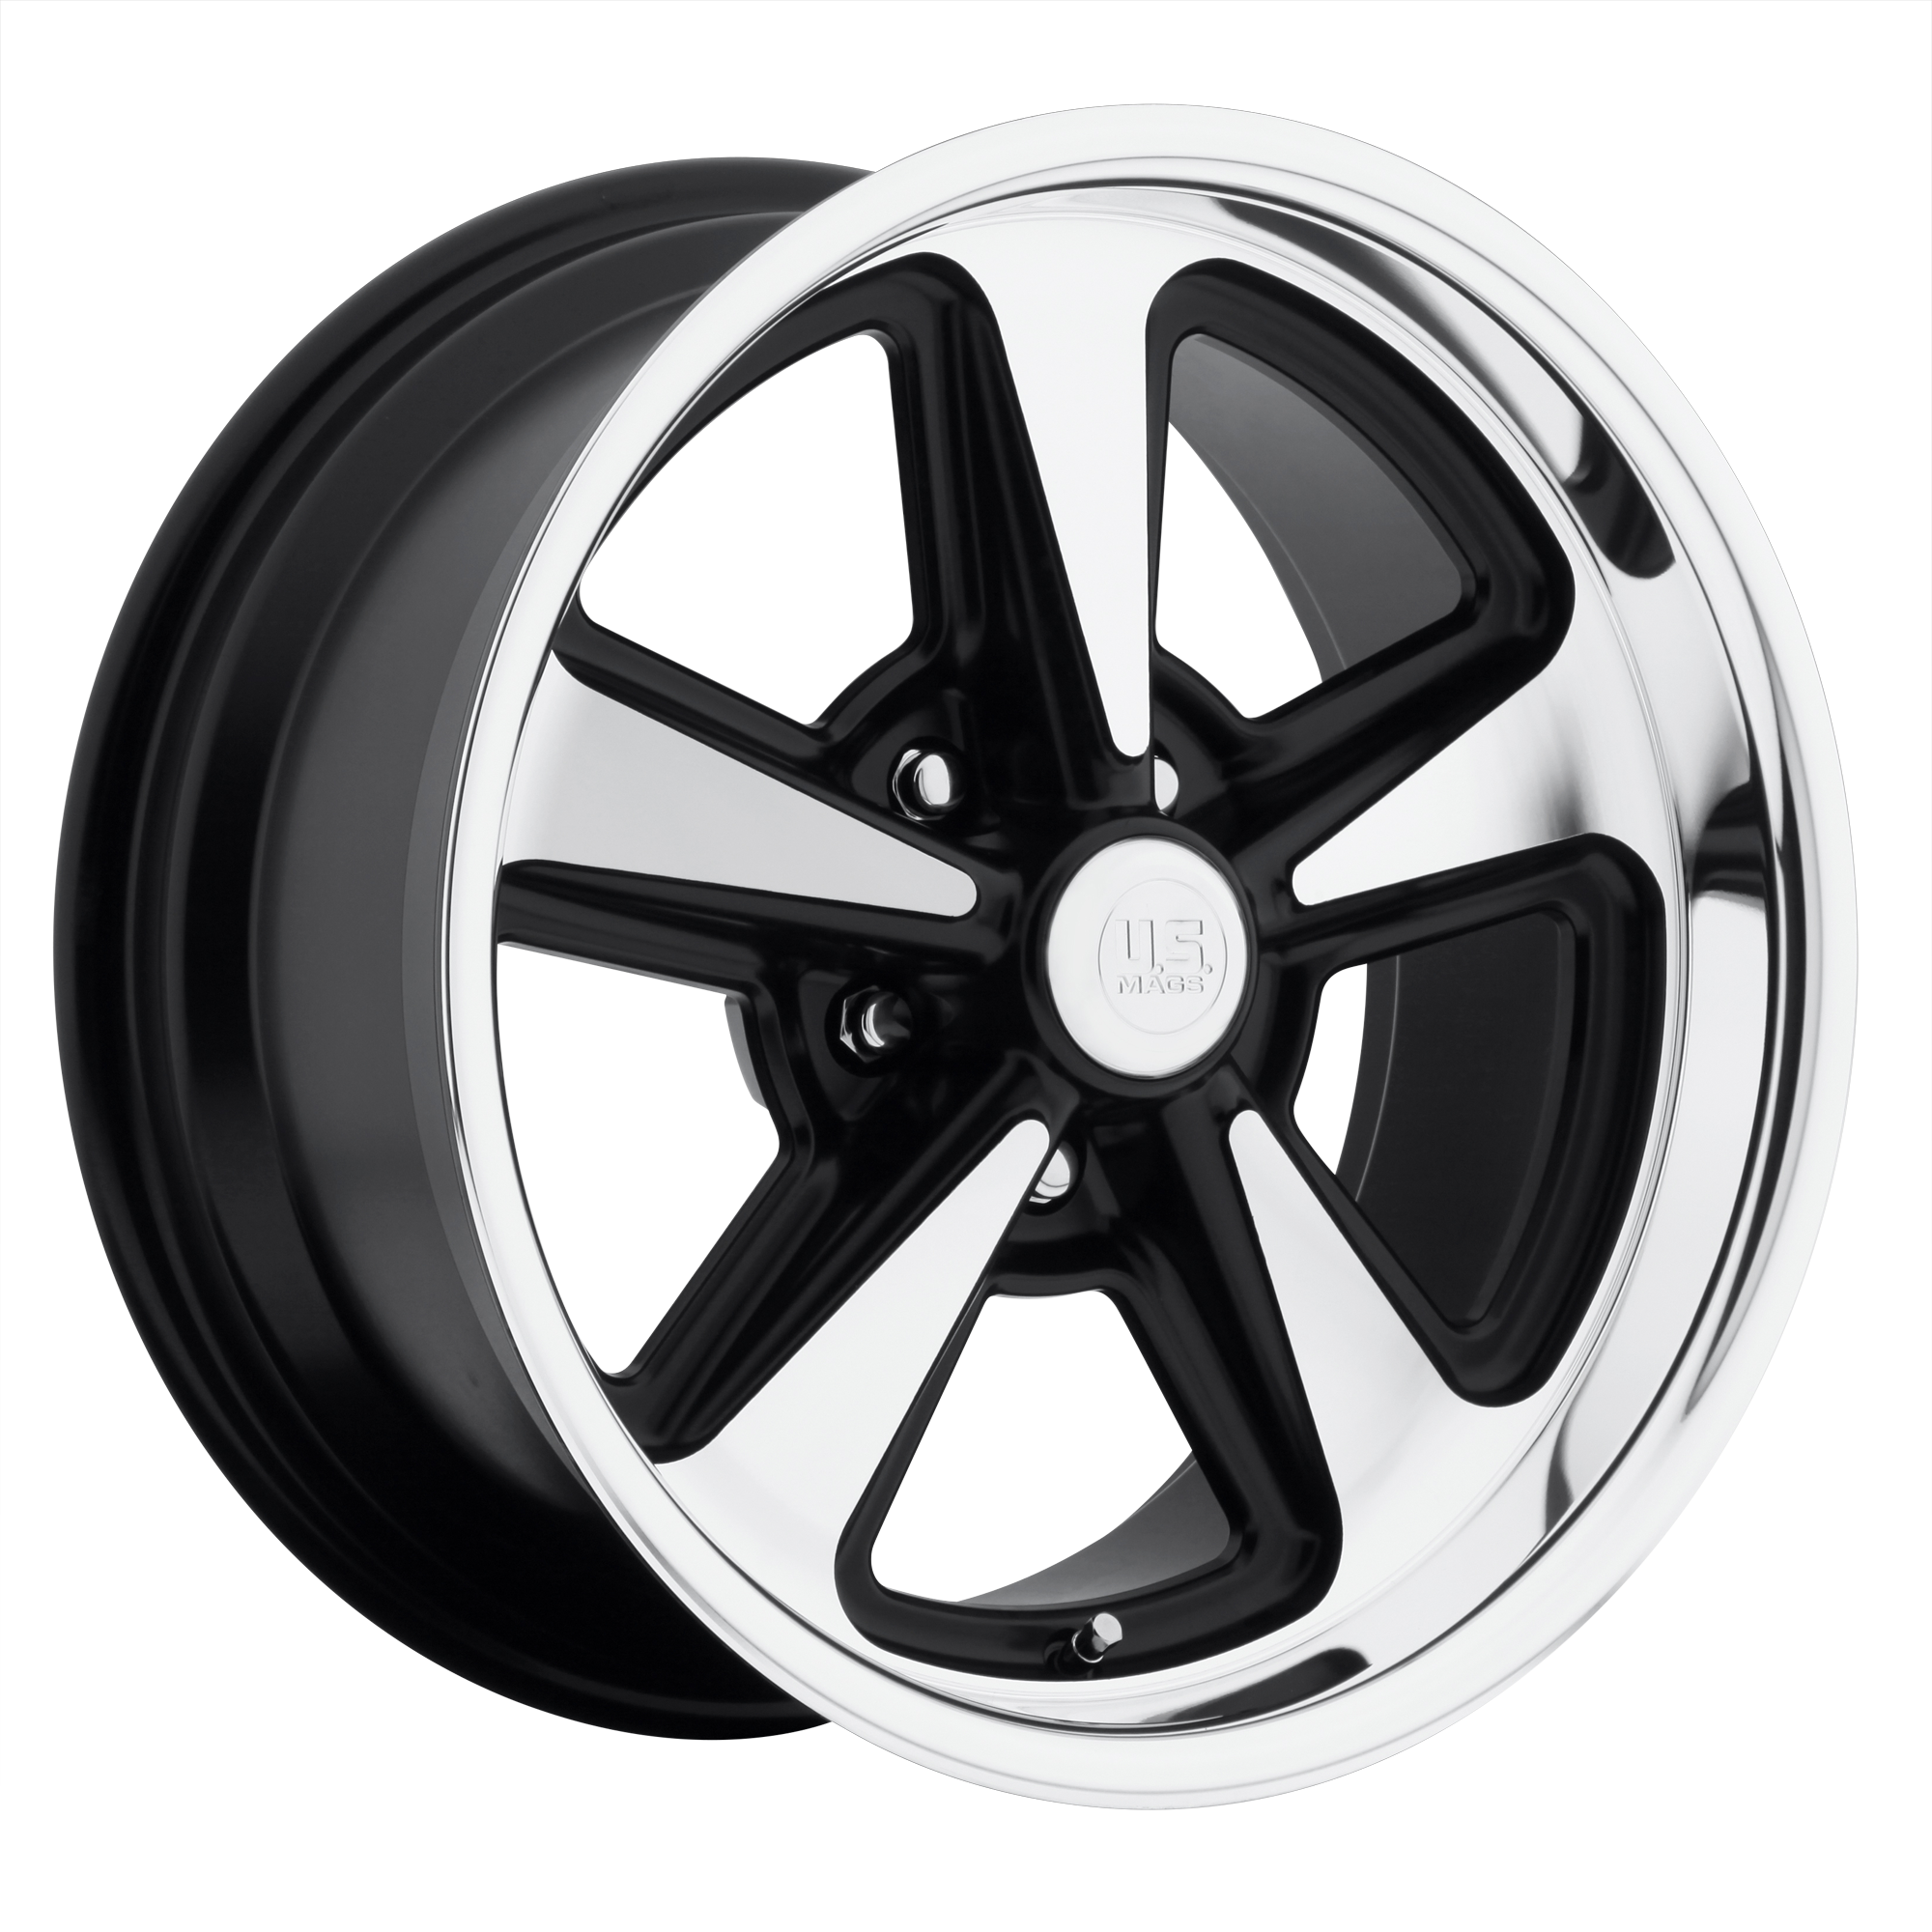 BANDIT 18x9 5x120.65 MATTE BLACK MACHINED (8 mm) - Tires and Engine Performance